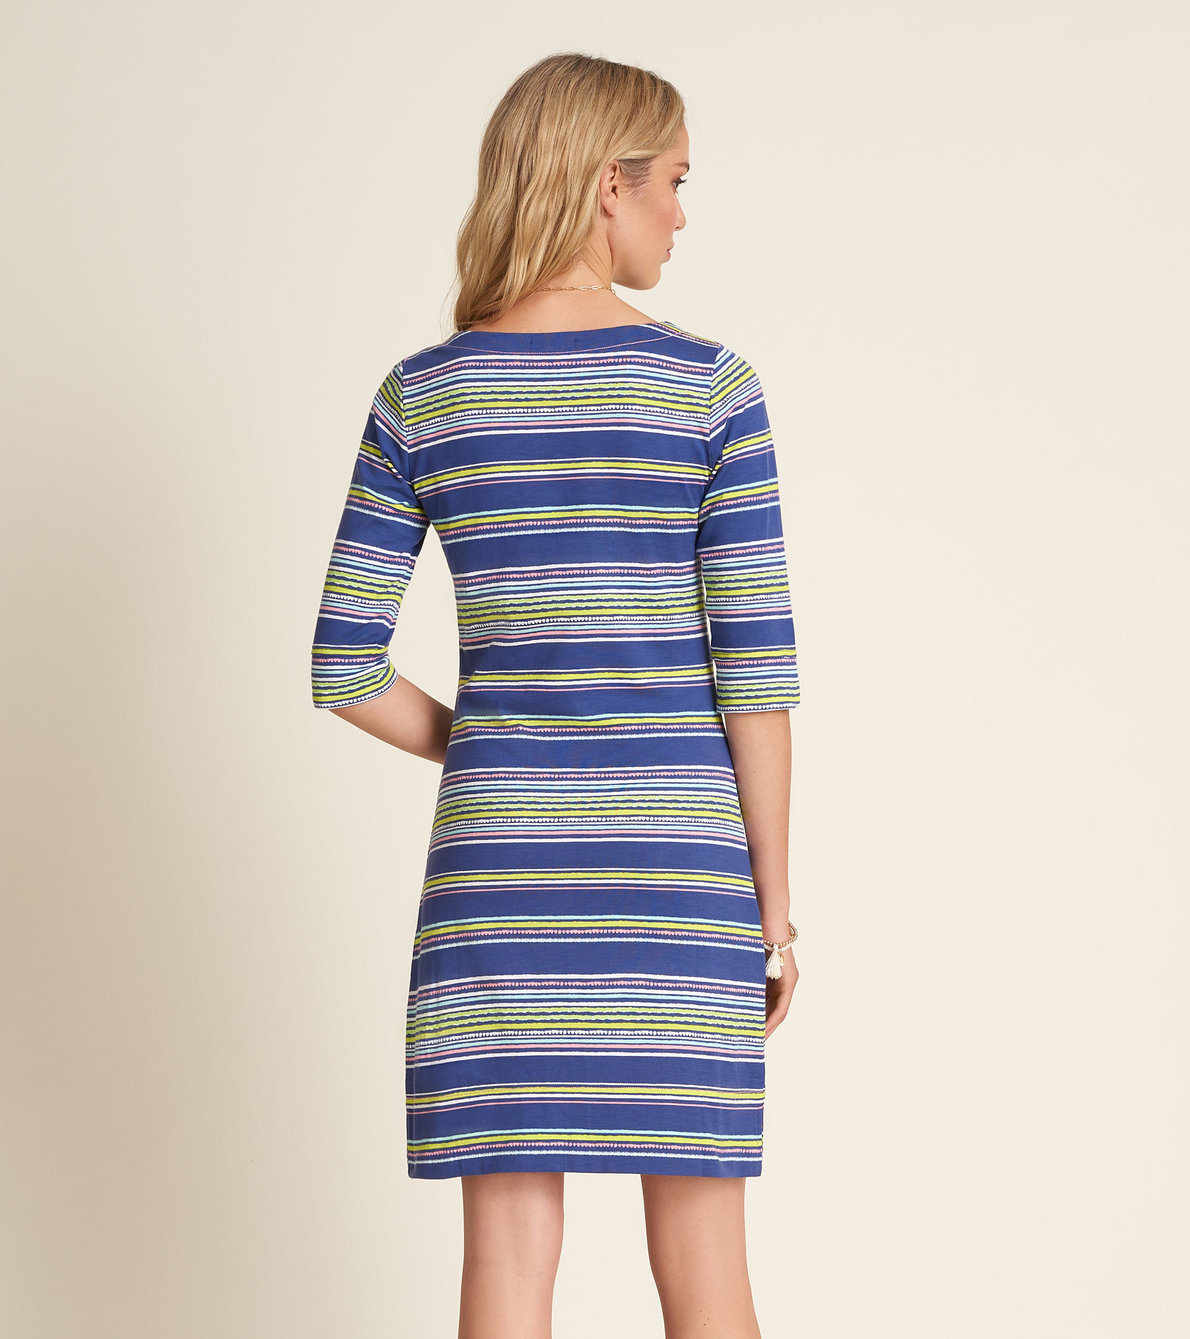 View larger image of Lucy Dress - Textured Stripes